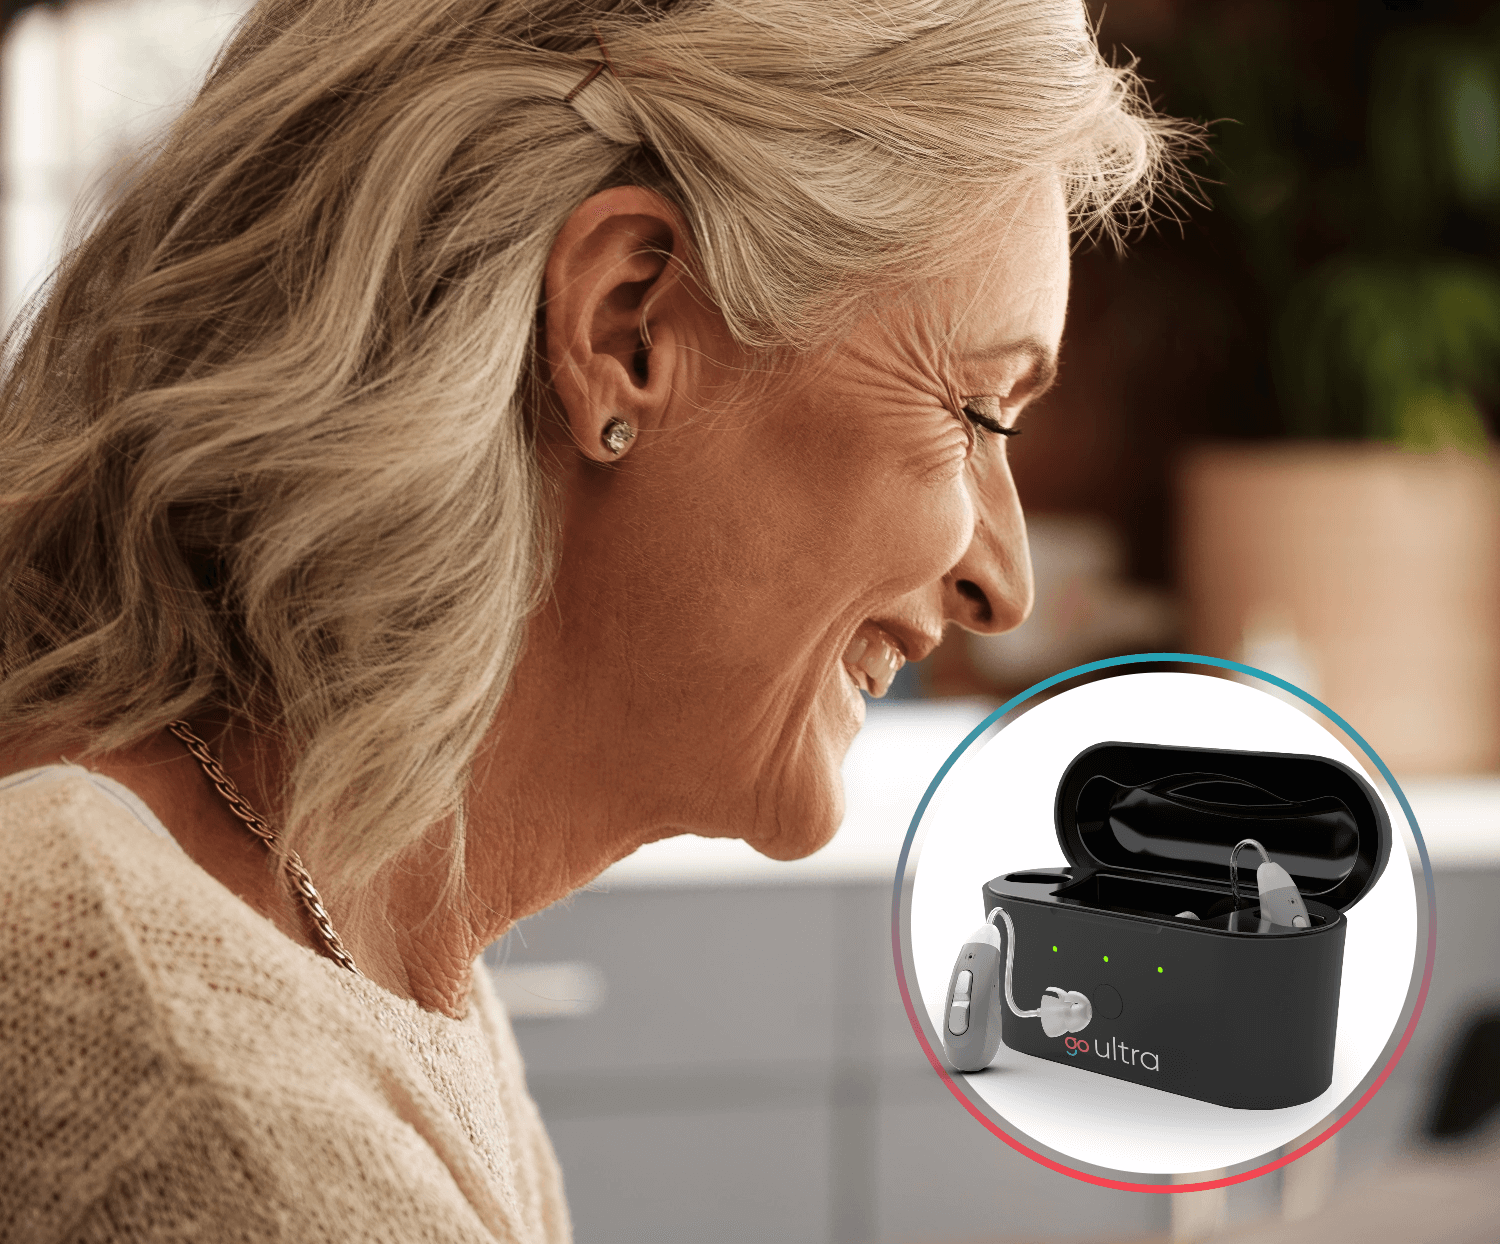  Go Prime Digital Hearing Aids for Seniors and Adults,  In-the-Ear Rechargeable Hearing Aids with Noise Reduction and Discreet Fit  for All-Day Comfort, Includes Rechargeable Hearing Aid Case (Black) :  Health 